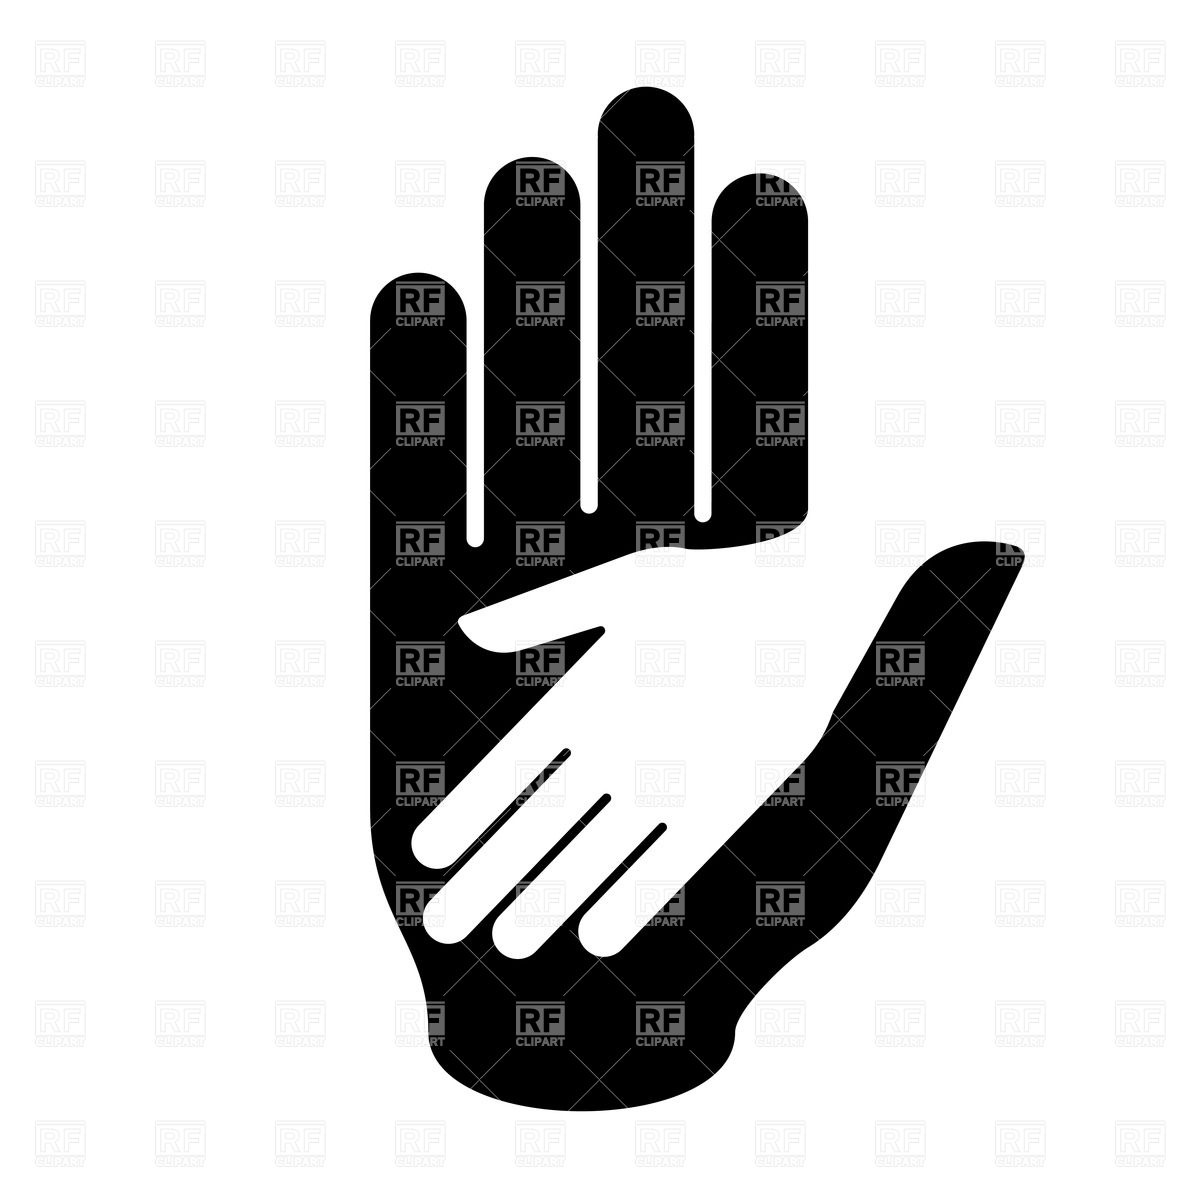 Open Hands Clipart Black And White   Clipart Panda   Free Clipart    